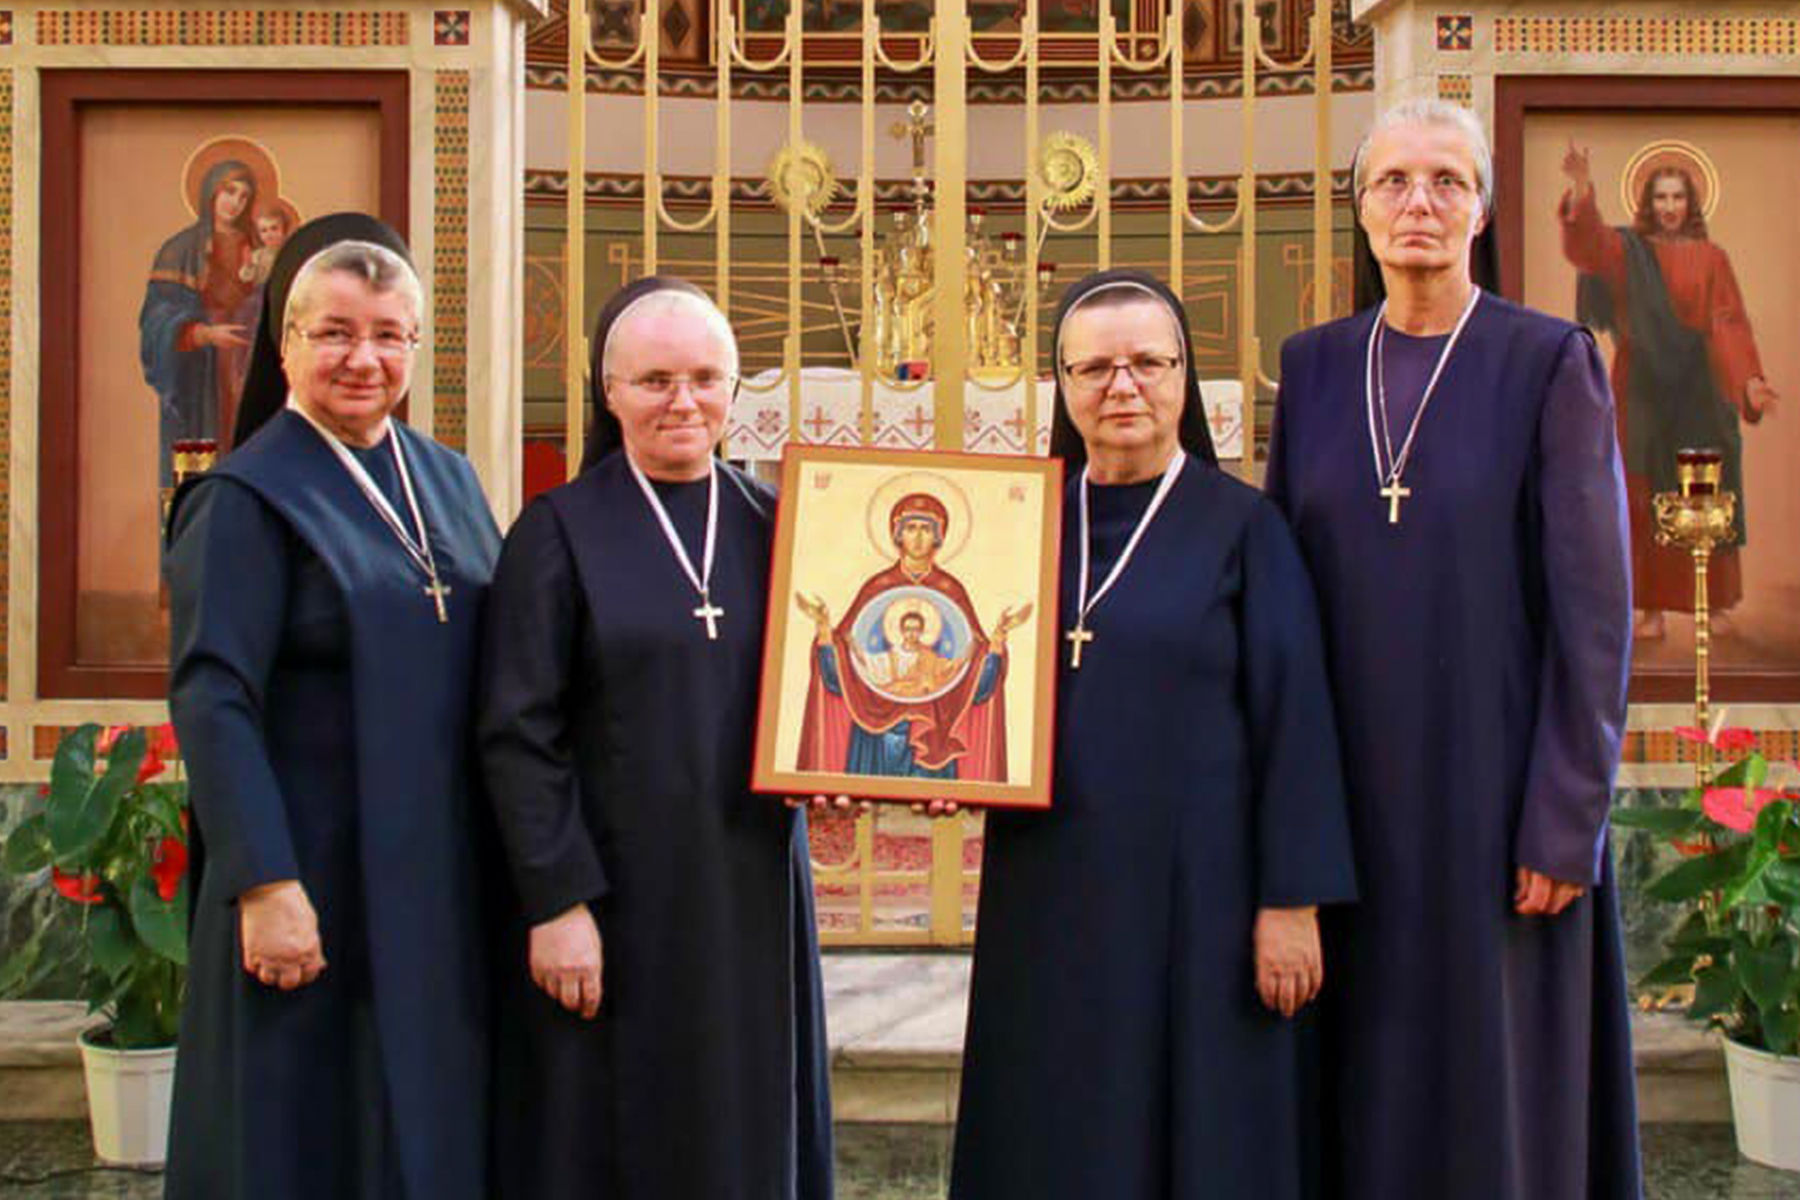 The Sisters Servants re-elected Sr. Sophia Lebedovych as superior general